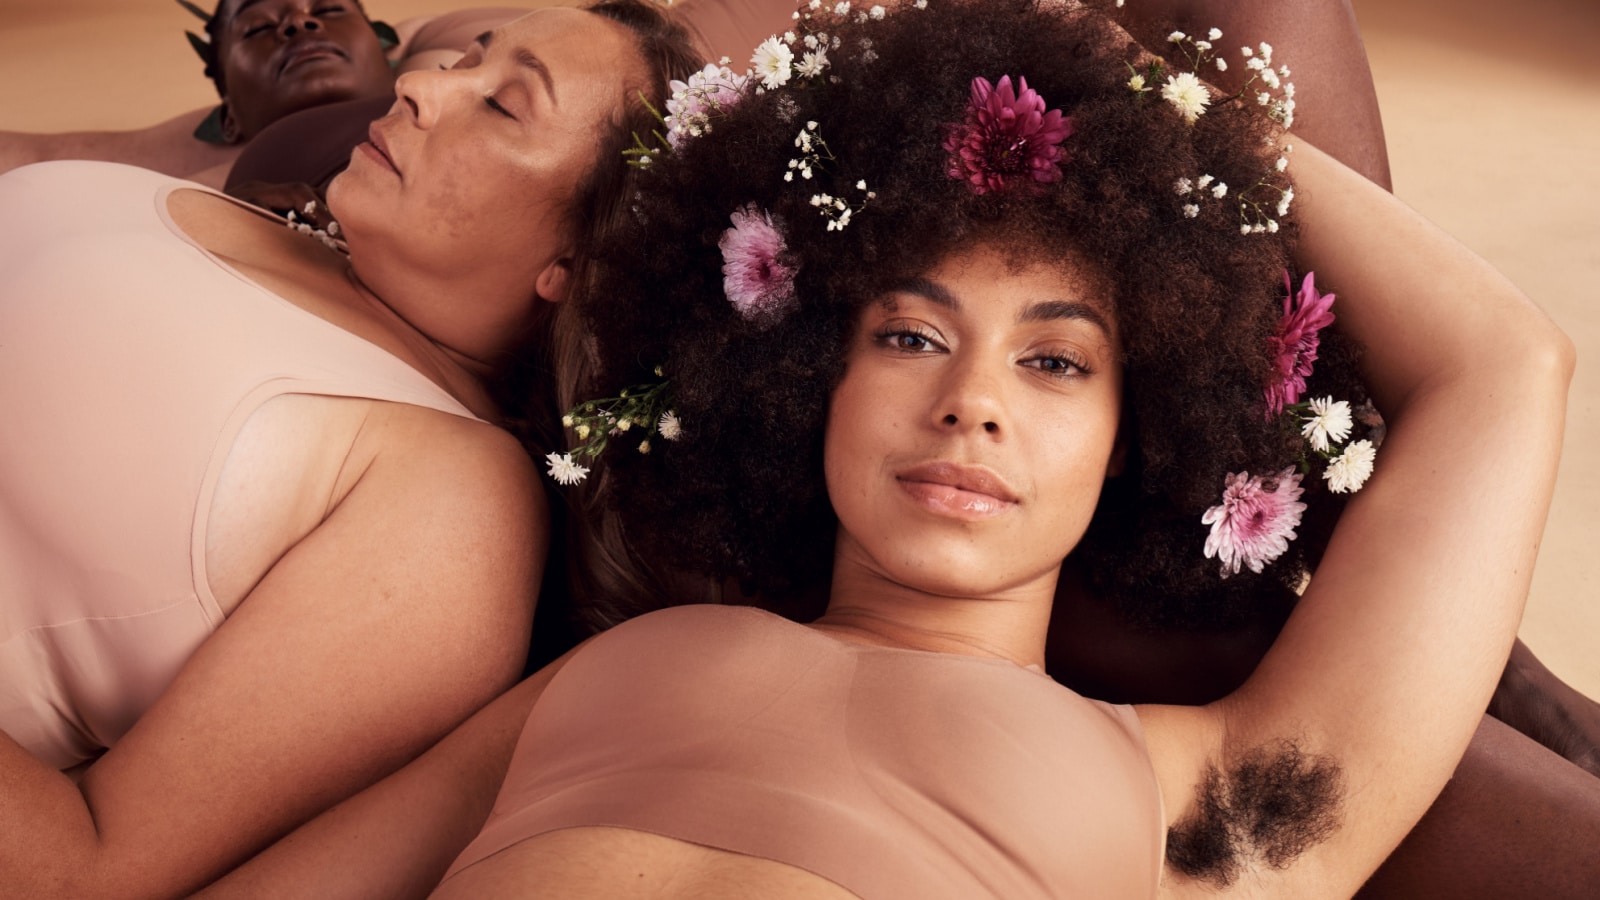 Armpit hair, confidence and floral black woman with natural beauty, body health and happy in skin with a group of women in studio. Creative, flower crown and portrait of a model with hairy underarm